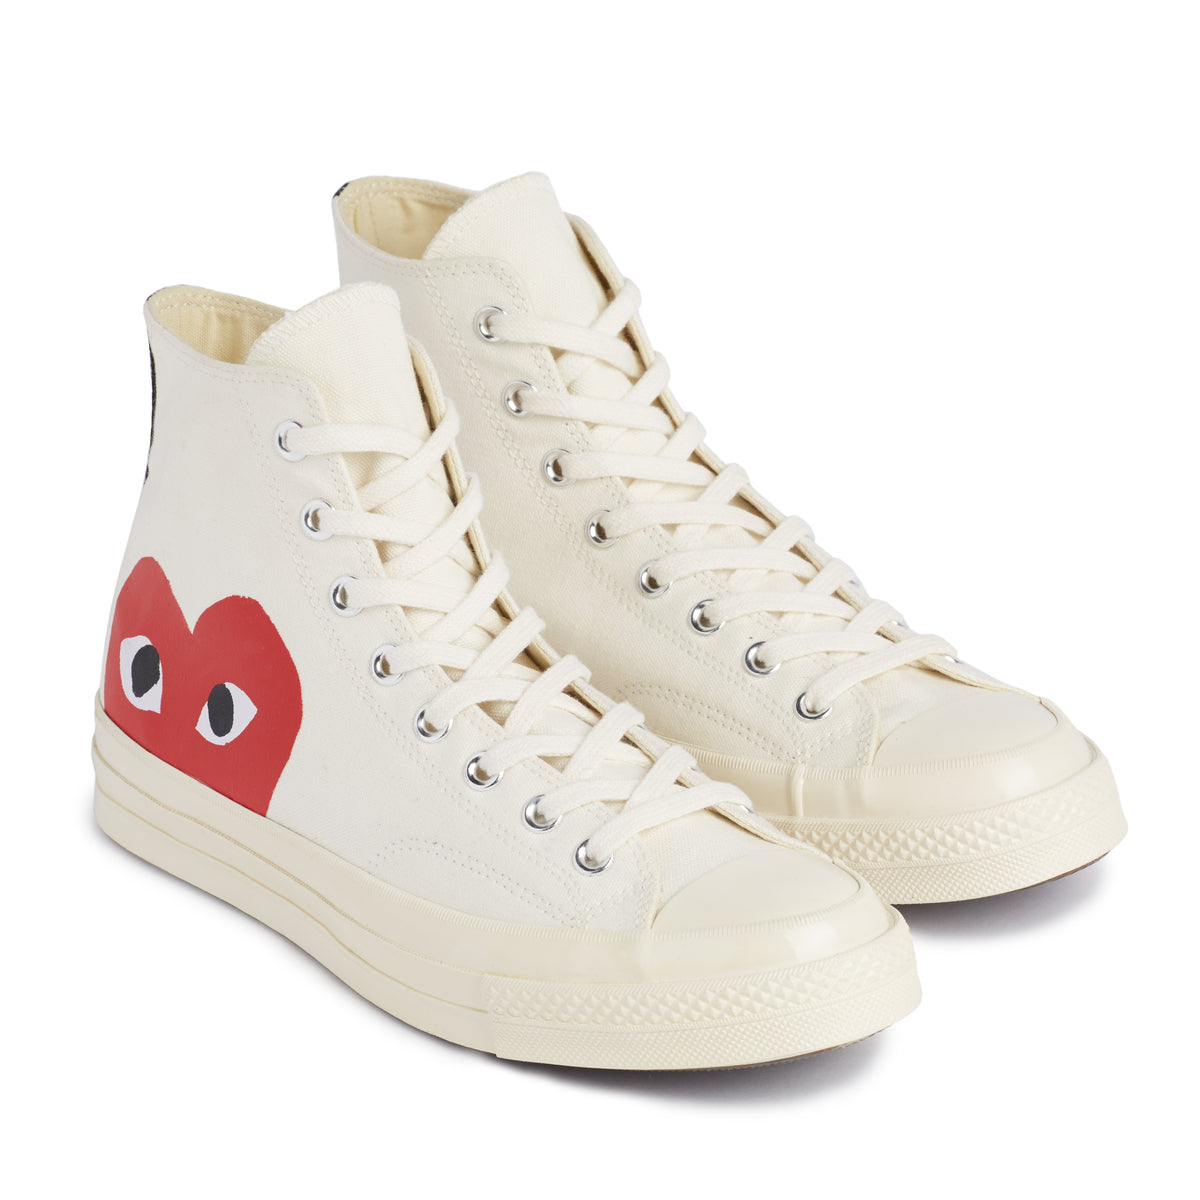 cdg white low top converse,Quality 